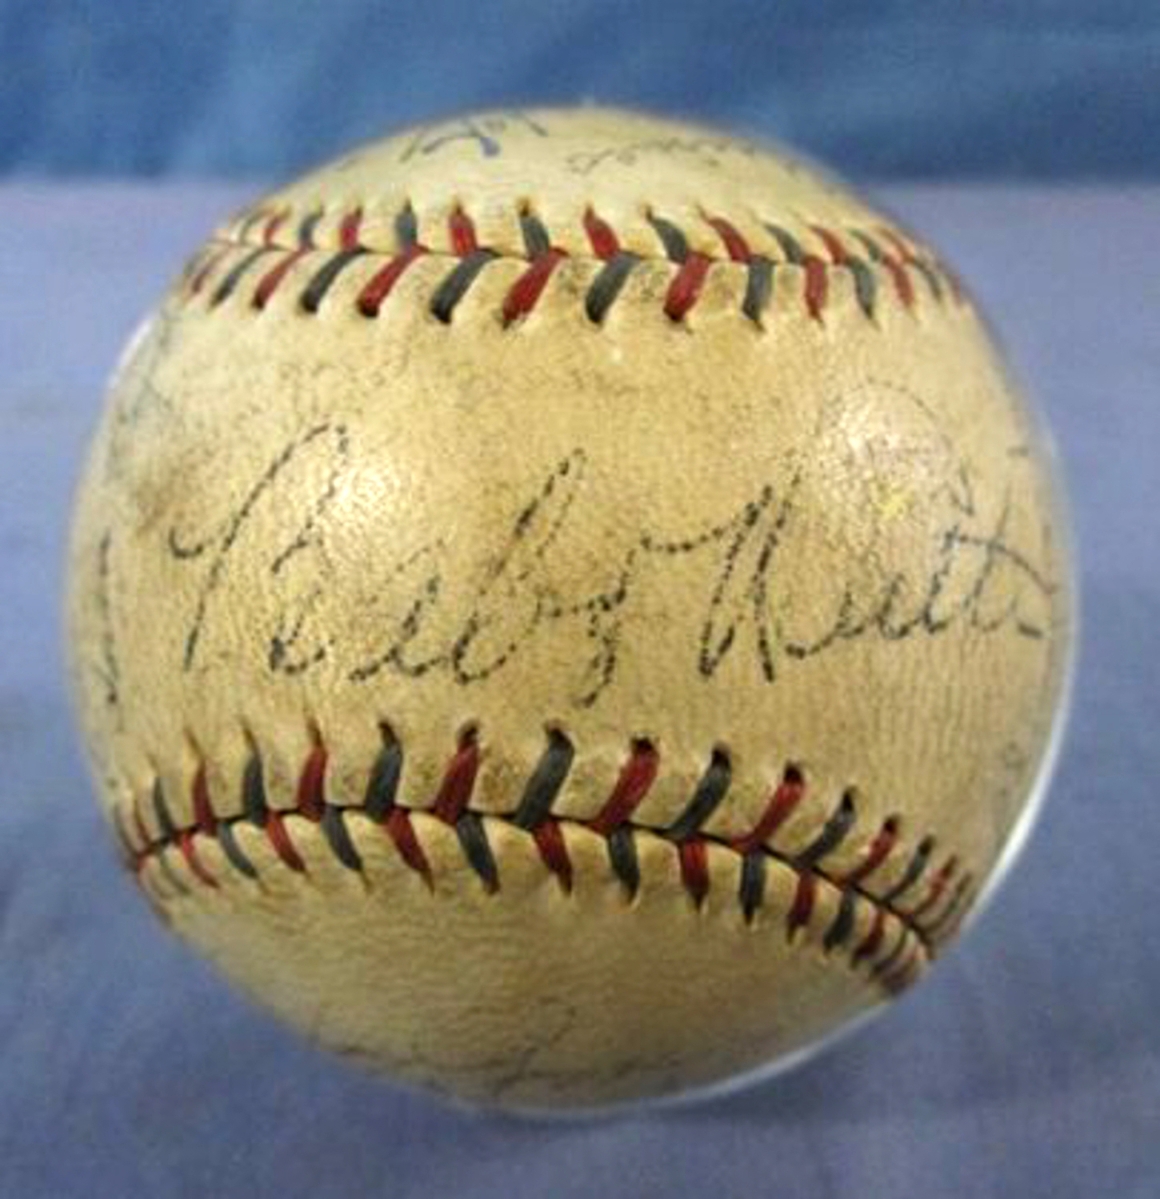 Babe Ruth & Gehrig Signed Ball, Sonntag Jr Portfolio Top Ingraham's New Year's